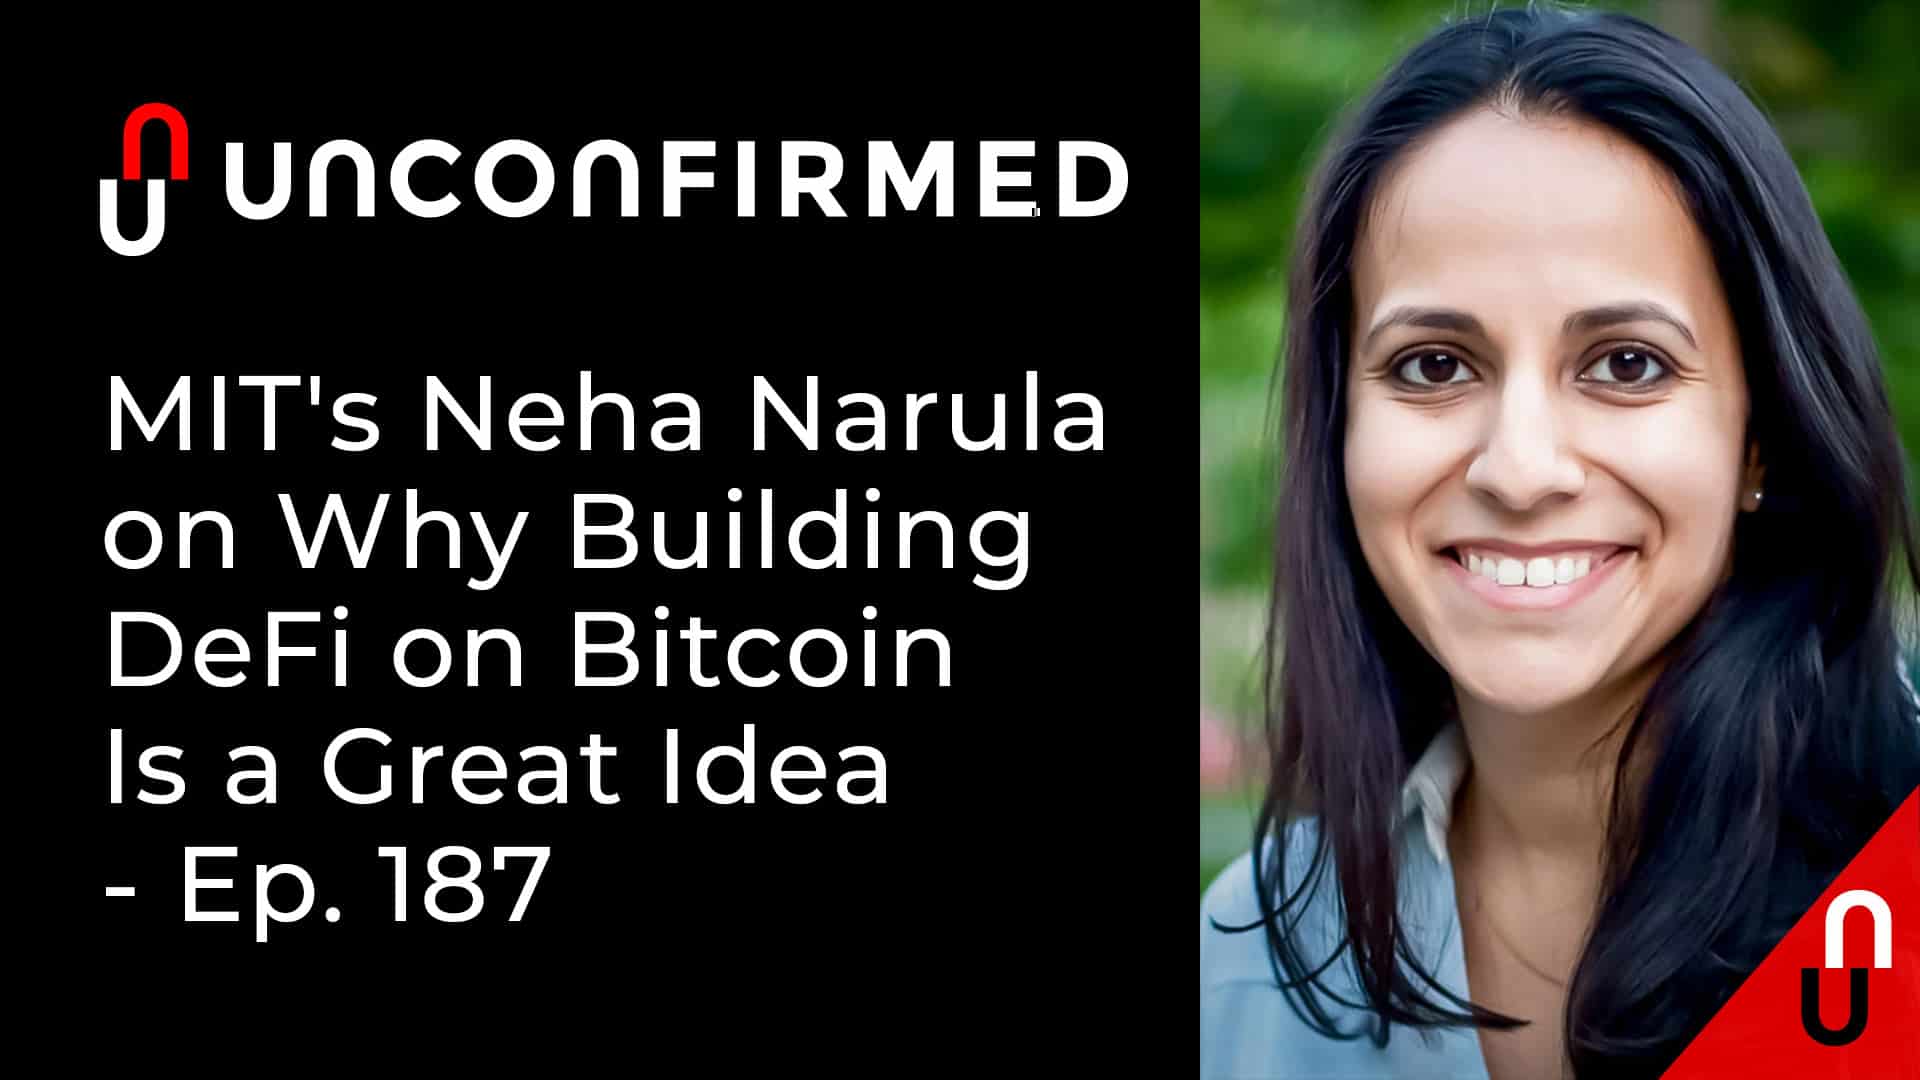 Unconfirmed - Ep.187 - MIT's Neha Narula on Why Building DeFi on Bitcoin Is a Great Idea